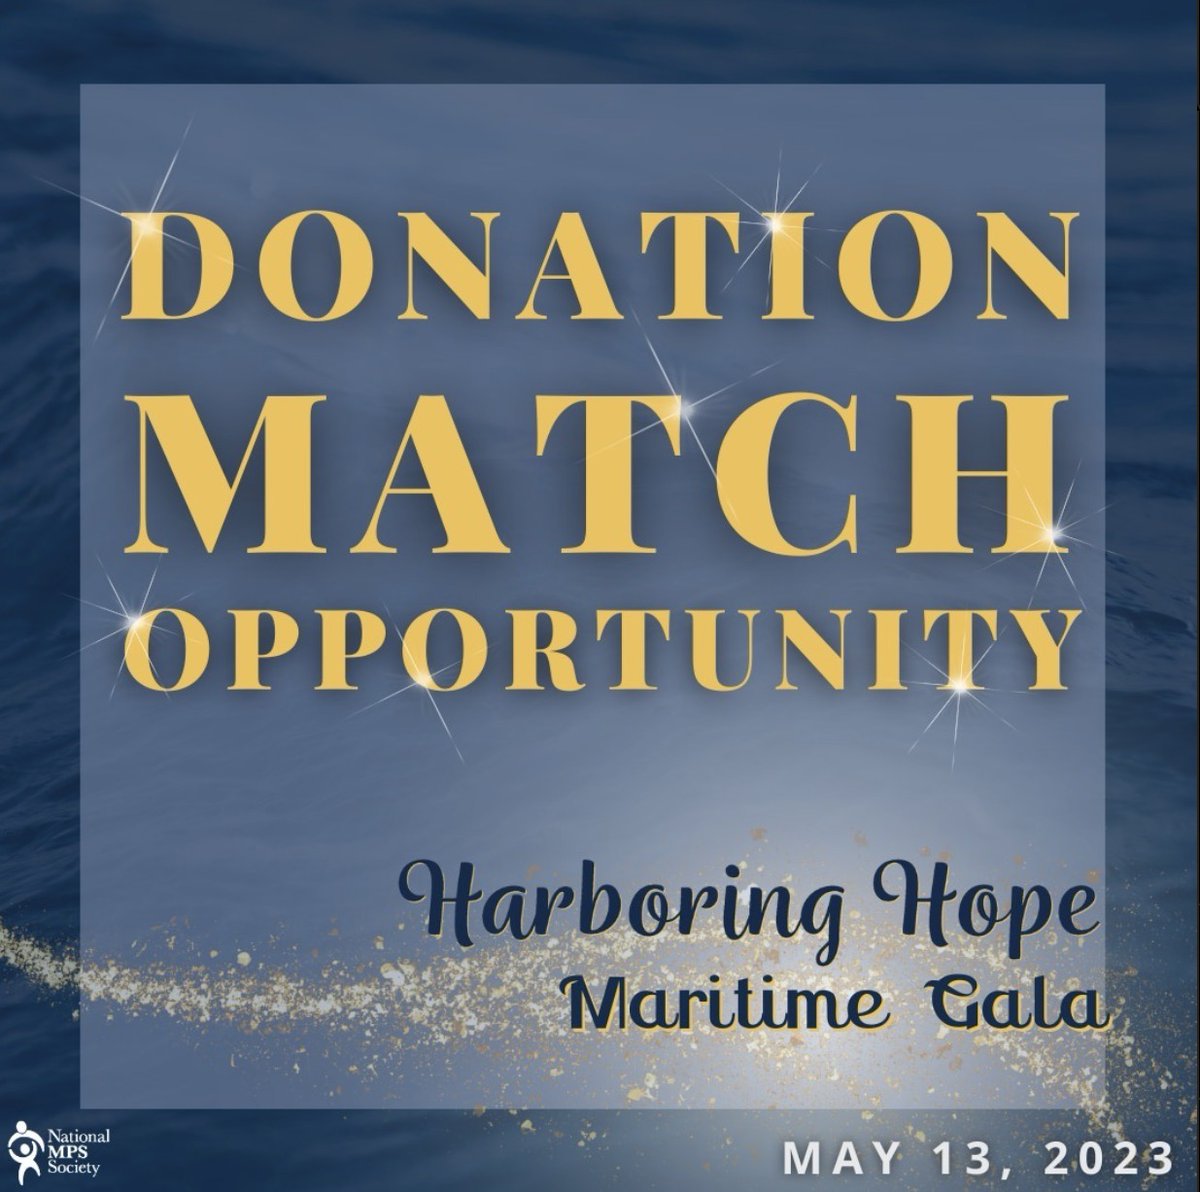 We're thrilled to announce the opportunity to donate now and have your gift matched! Up until our #MPS #MaritimeGala on Saturday, an anonymous Donor will provide a $5,000 donation MATCH challenge to double your impact! $5,000 Matching Gift + $5,000 New Donor Gifts = $10,000!!